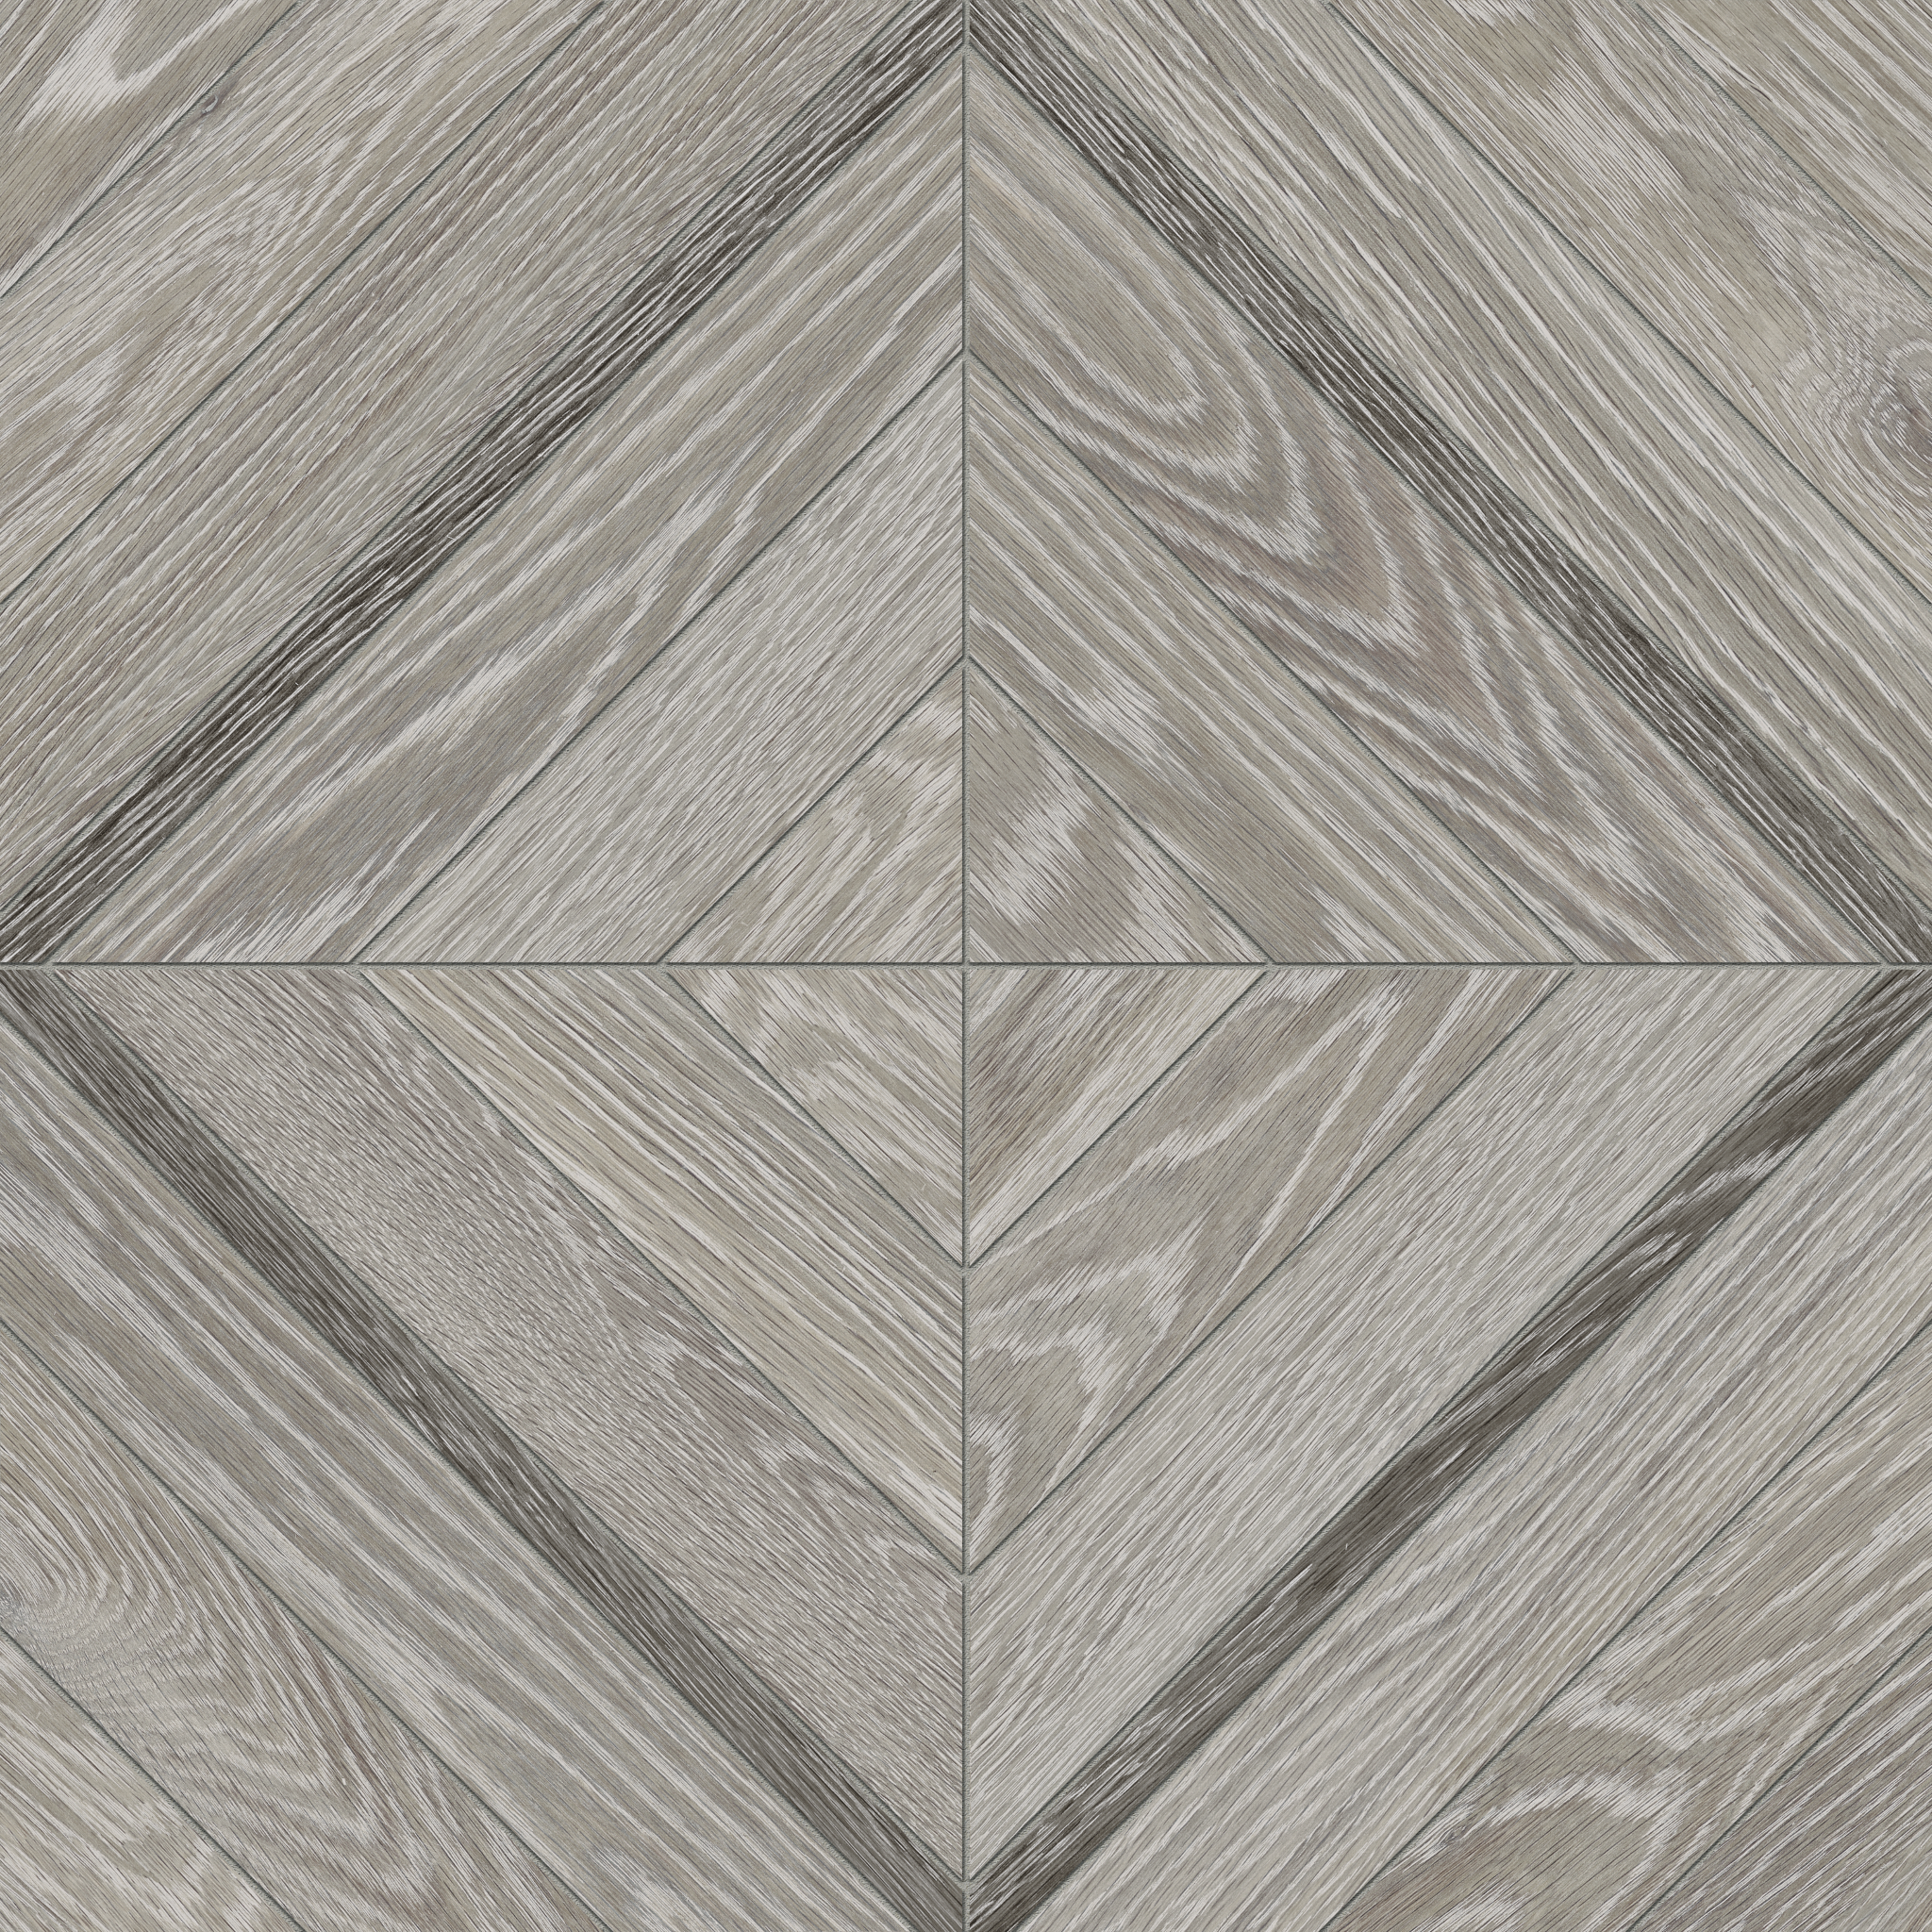 beachcomber marquetry pattern glazed porcelain mosaic from aspen anatolia collection distributed by surface group international matte finish straight edge edge mesh shape